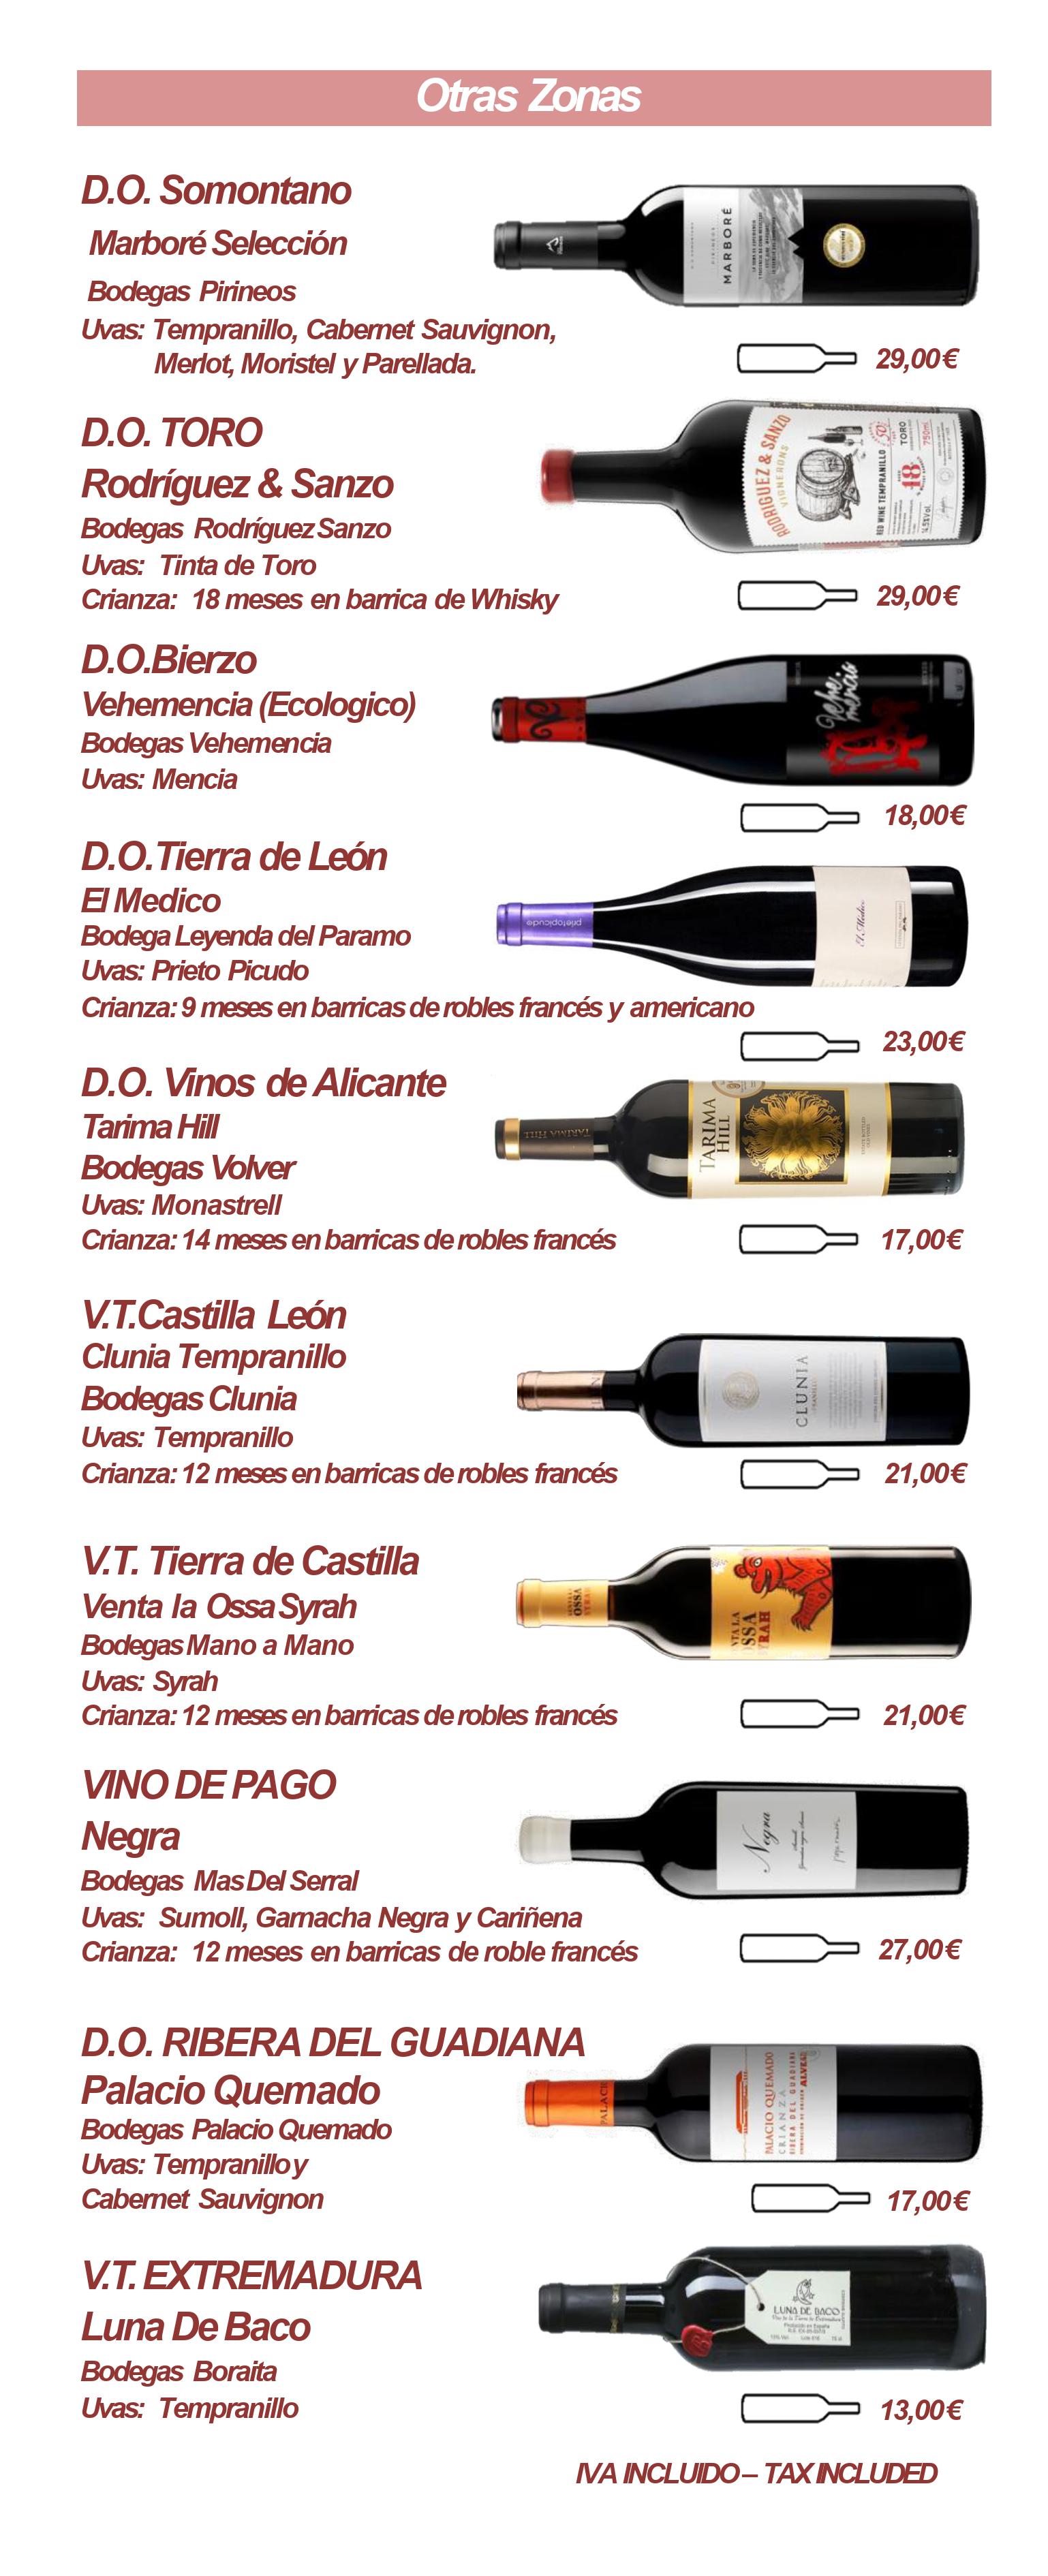 OTHER WINES